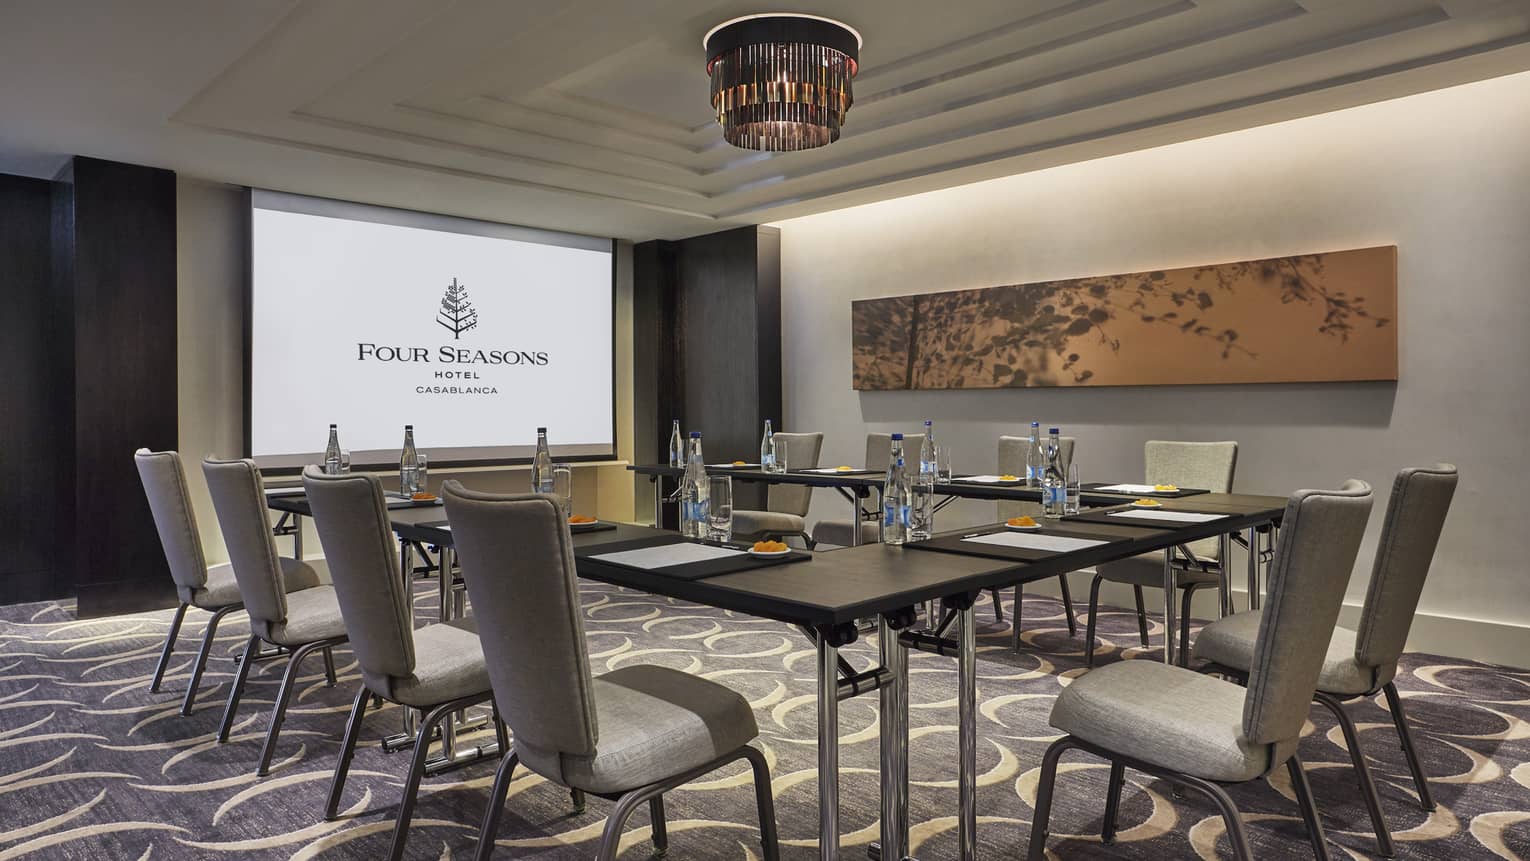 Business meeting room with large screen with Four Seasons logo, tables and chairs